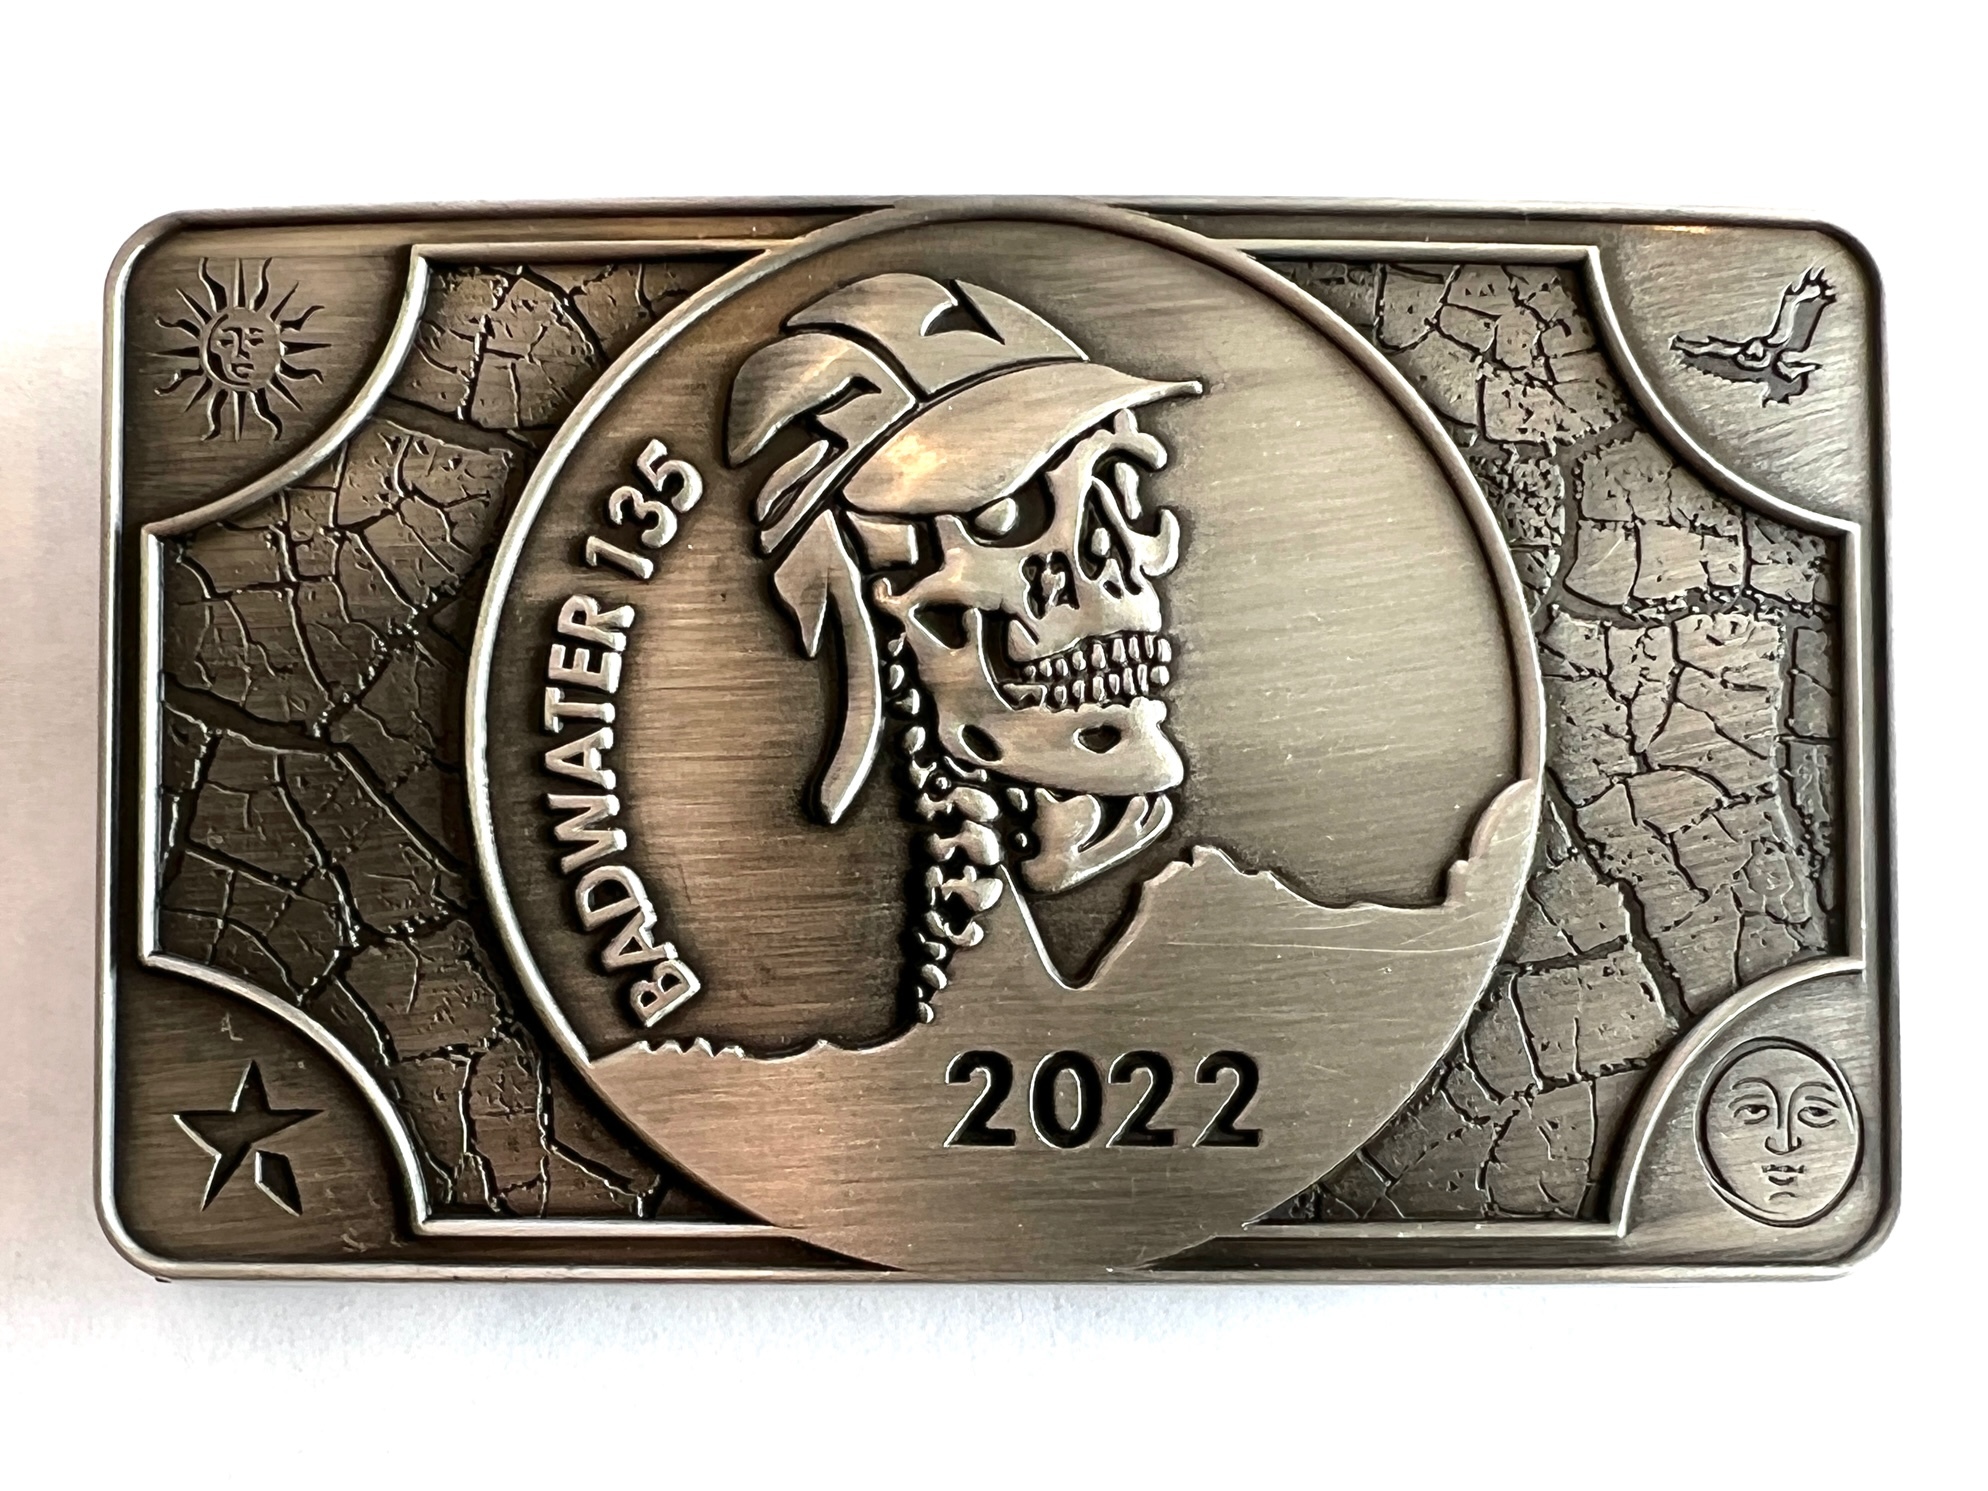 Each Badwater 135 finisher receives this belt buckle.